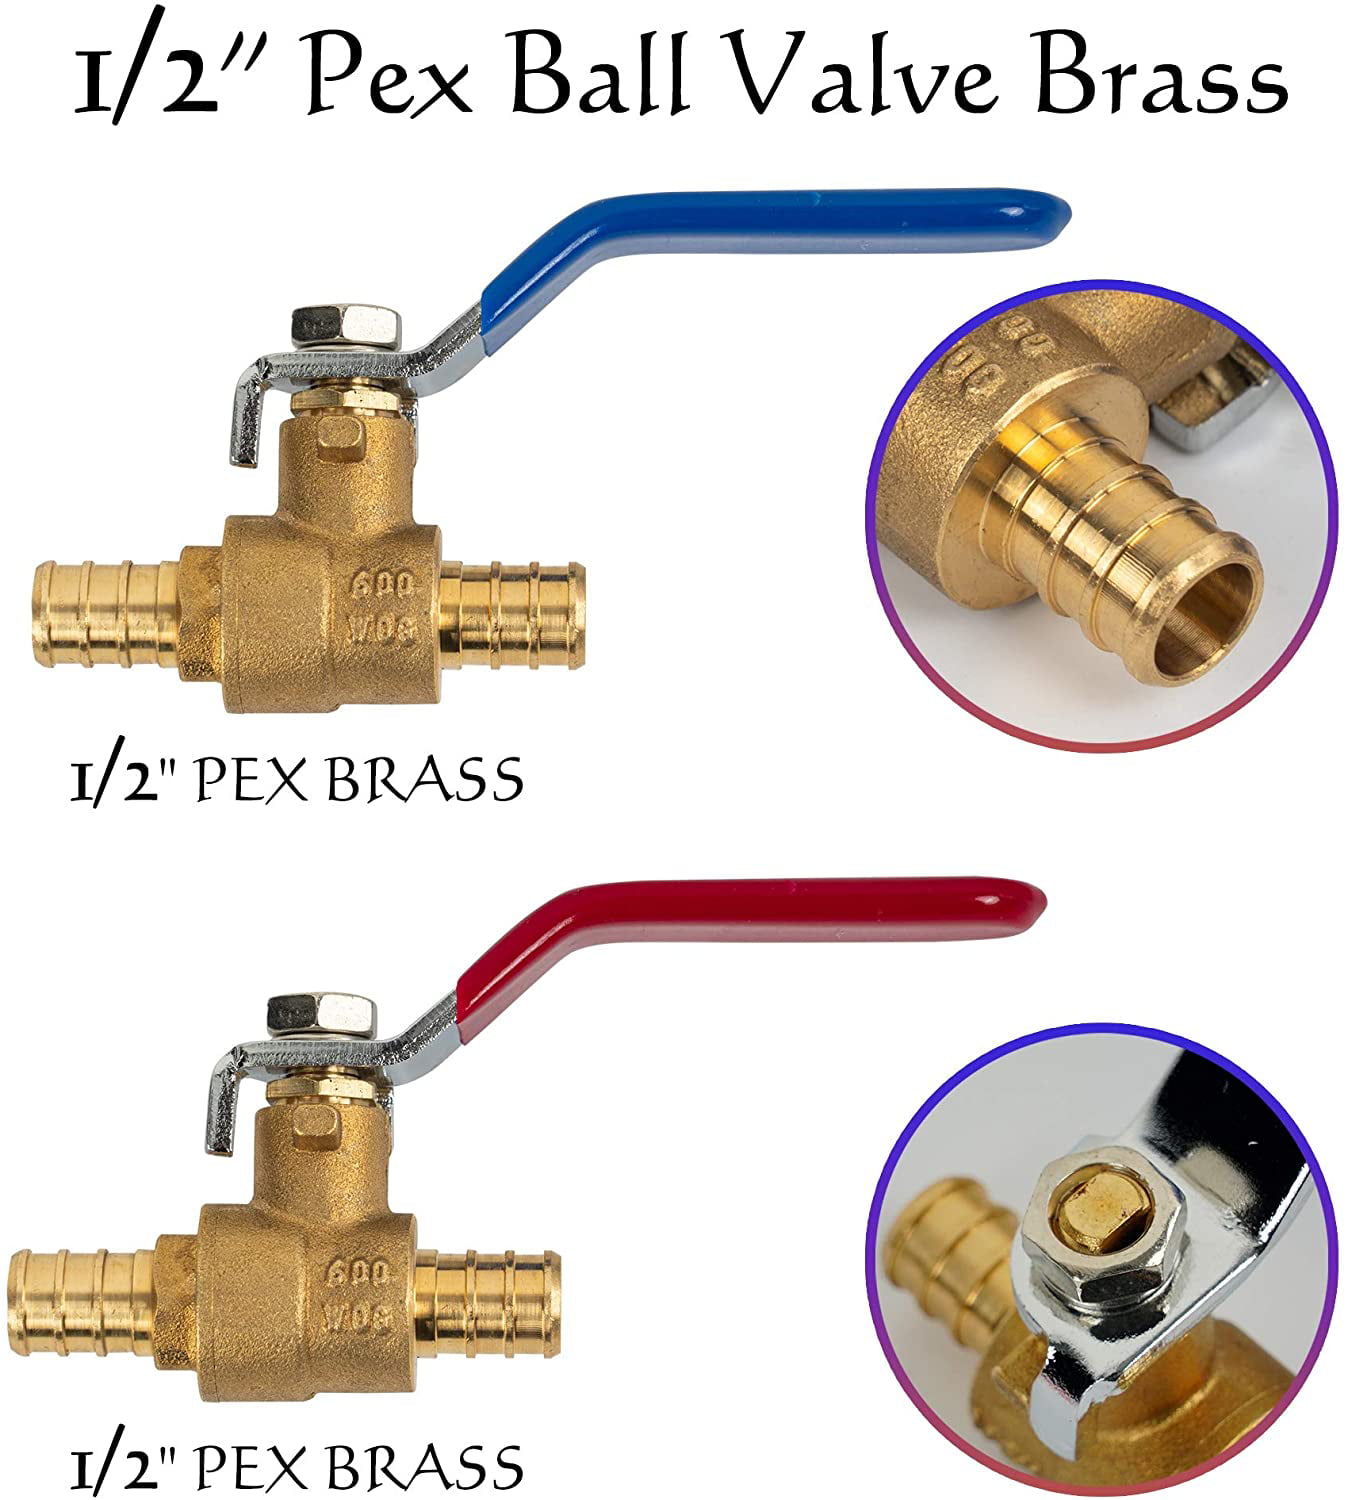 10 PIECES 1/2" PEX SHUT OFF BALL VALVE FULL PORT HOT AND COLD LEAD FREE BRASS 